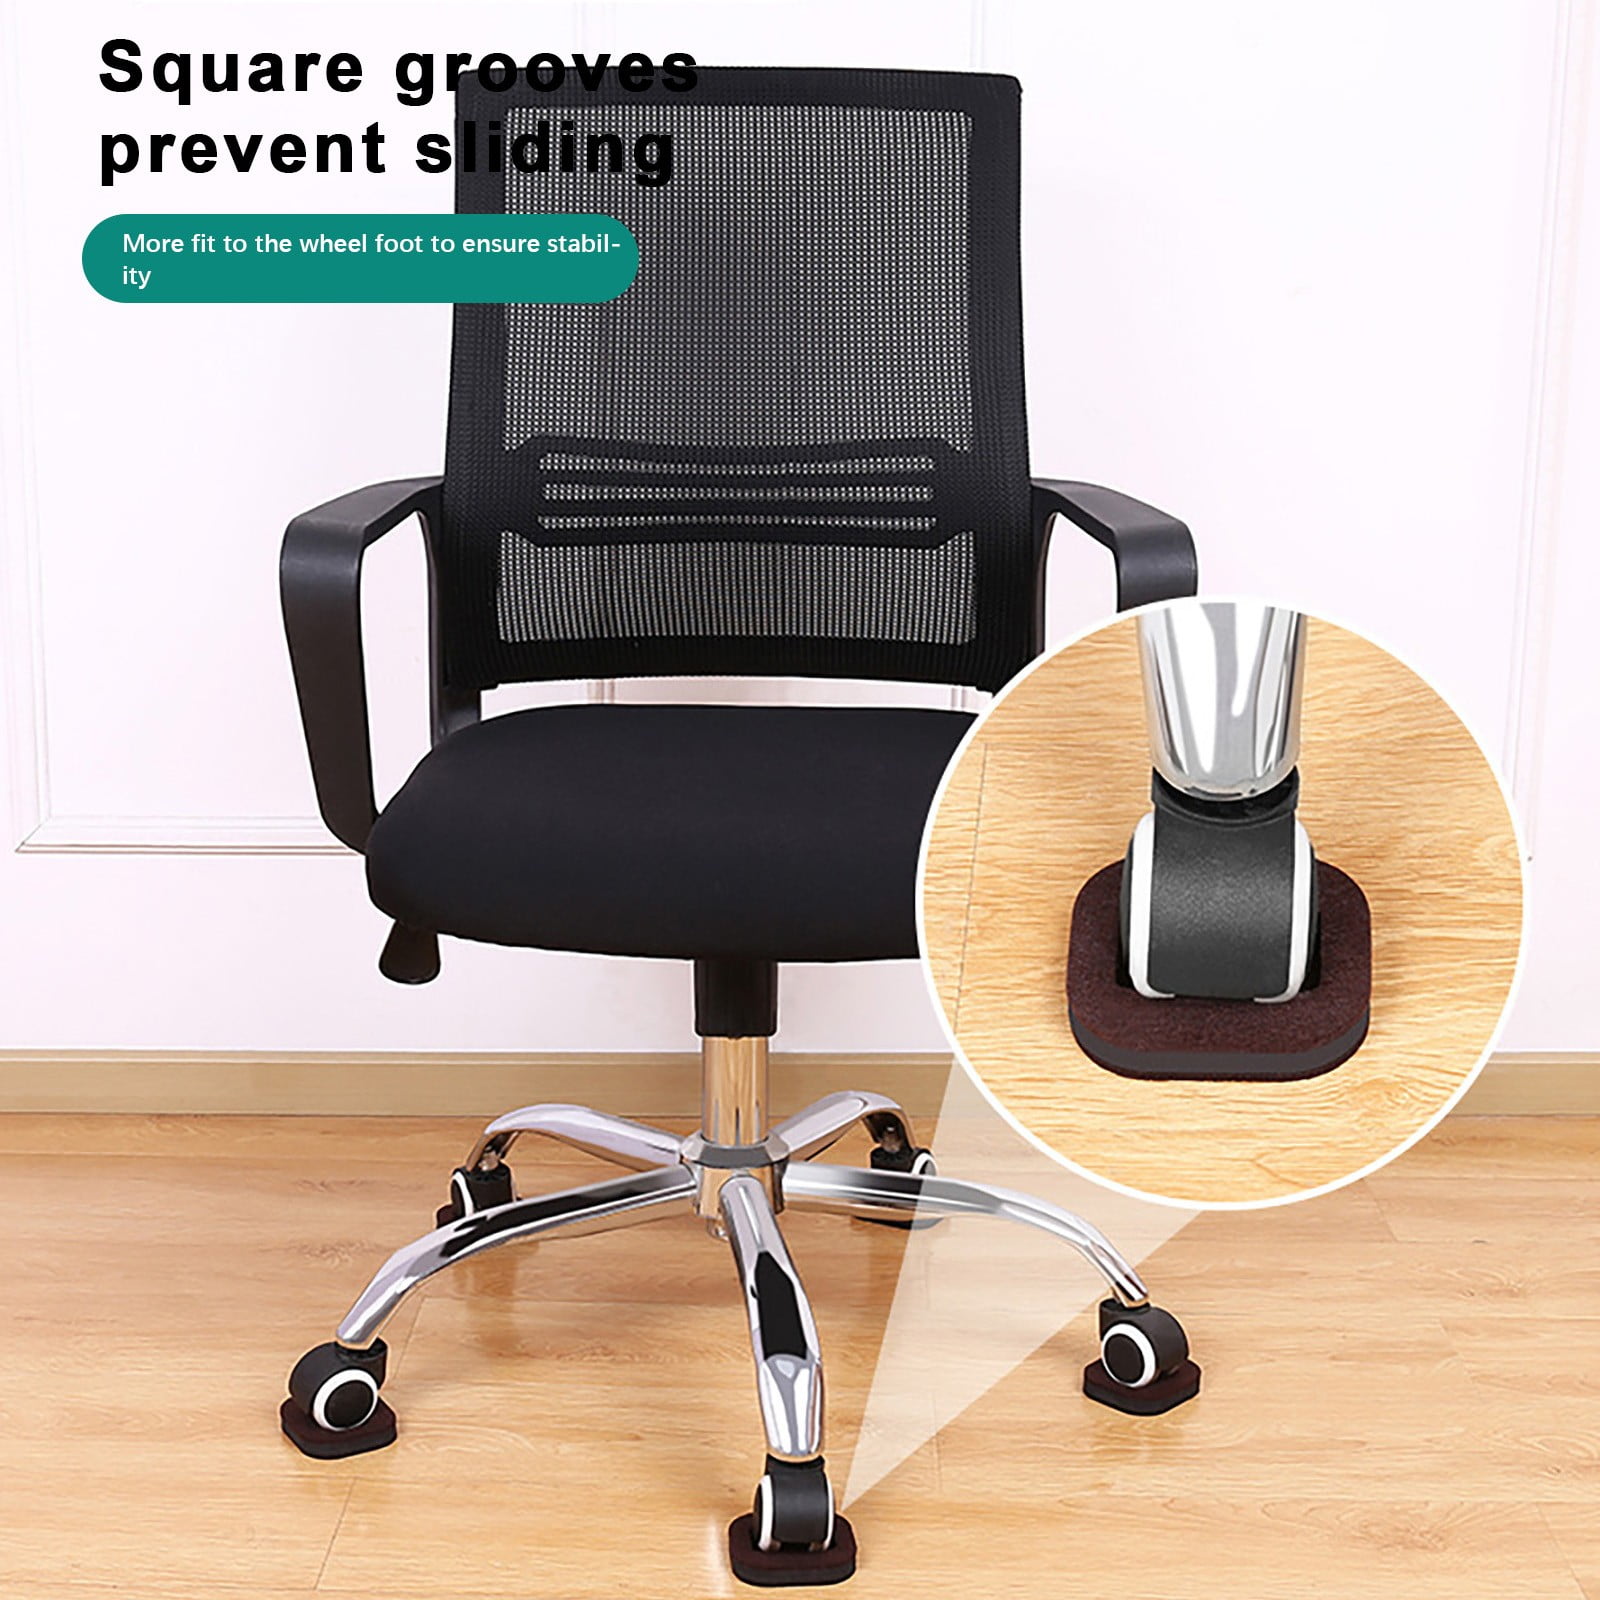 Hot Sale Desk Chair Foot Leg Protector Protect Floor Anti-scratch Cover Tool 